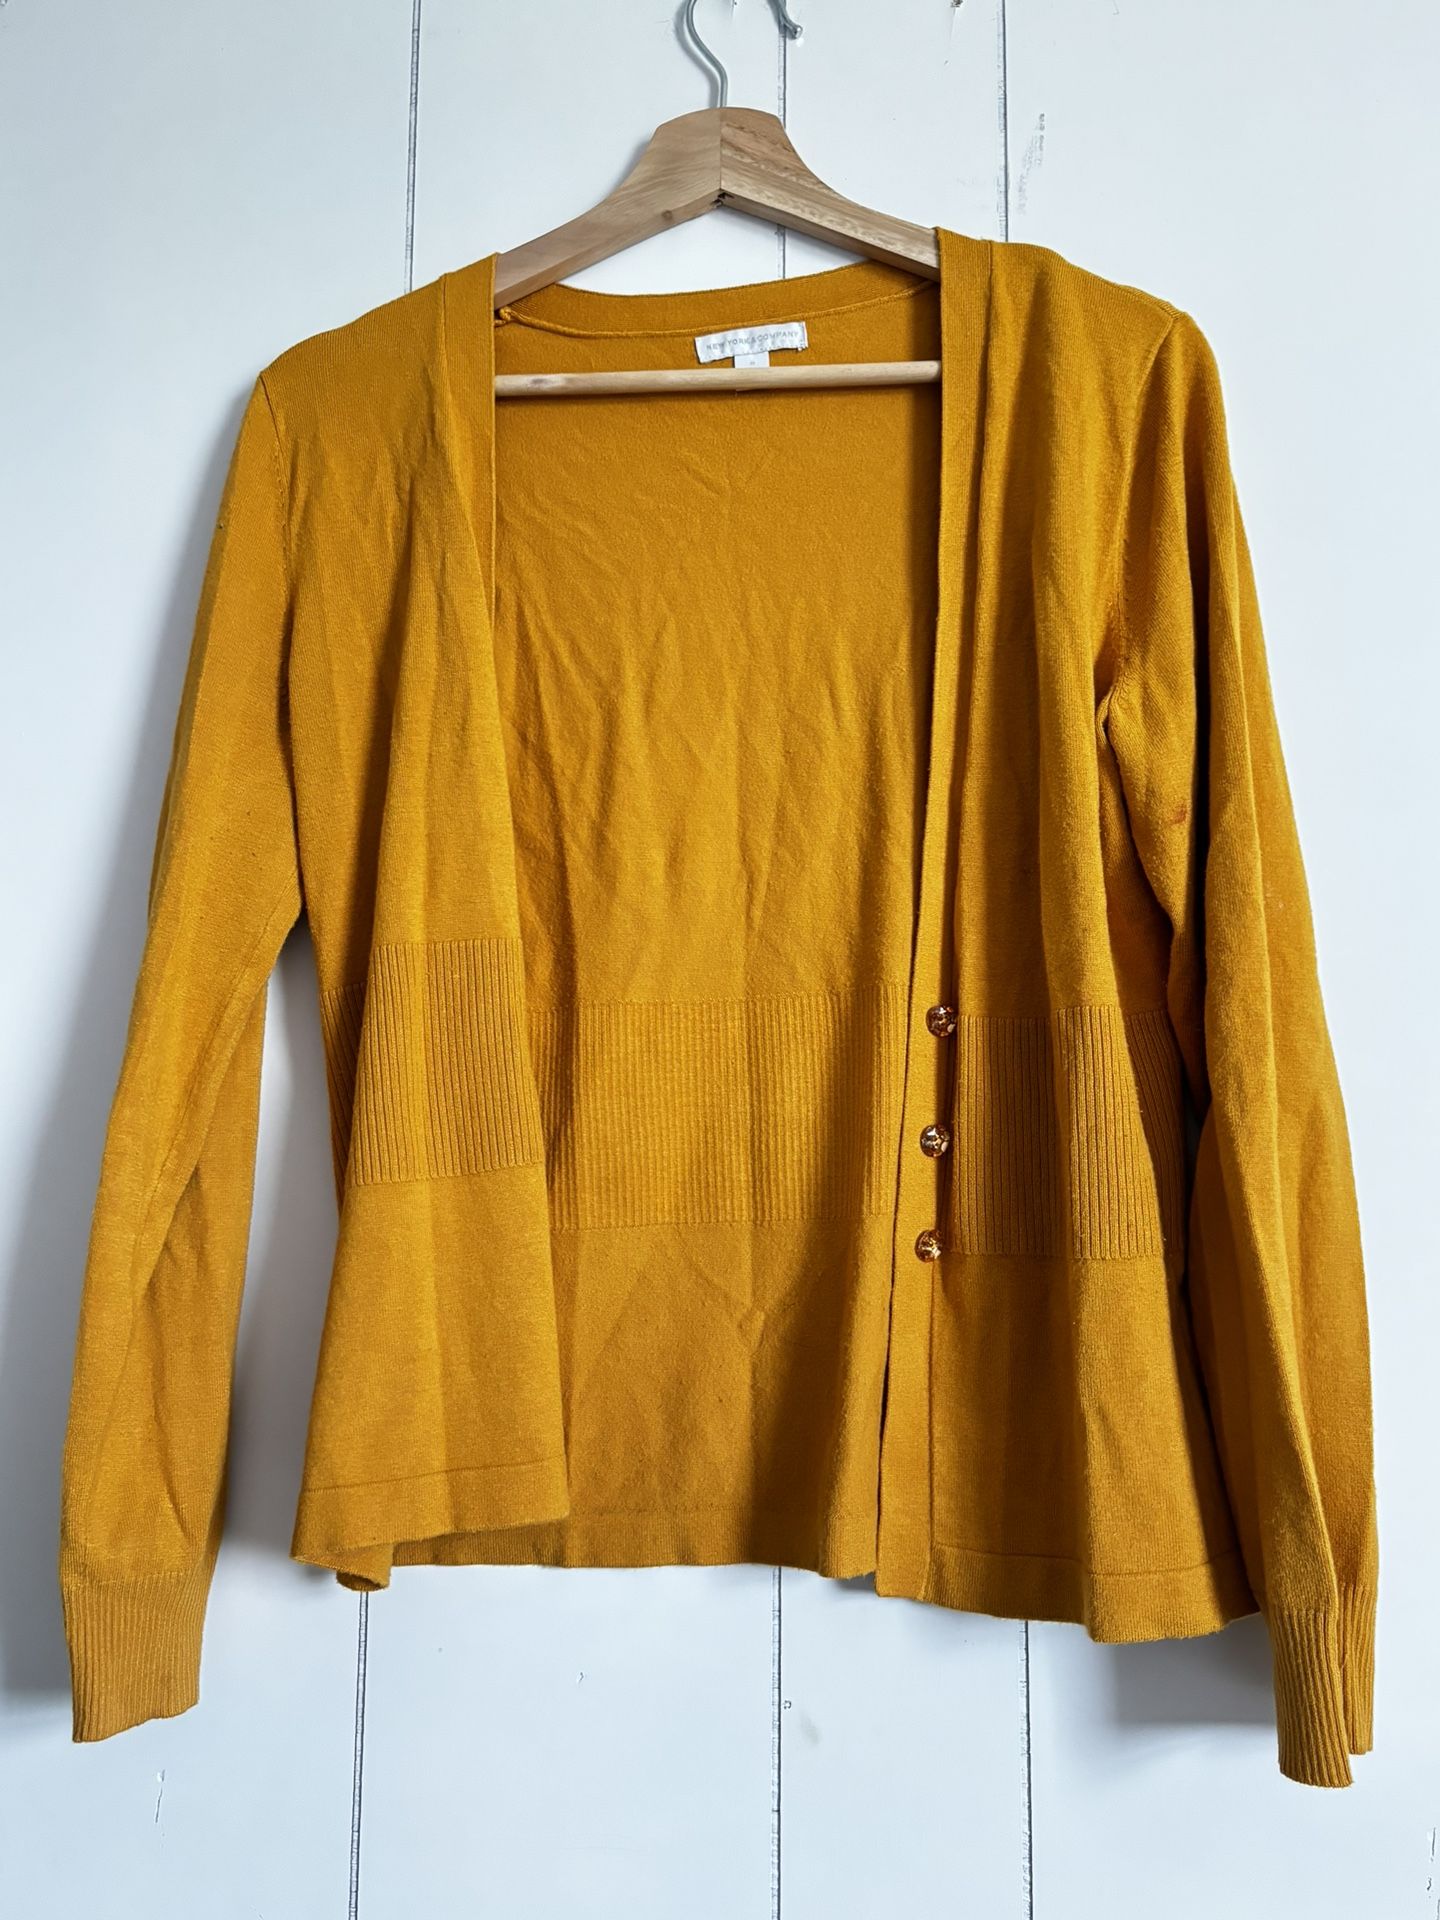 New York & Company Mustard buttoned Cardigan size M perfect for Fall season!